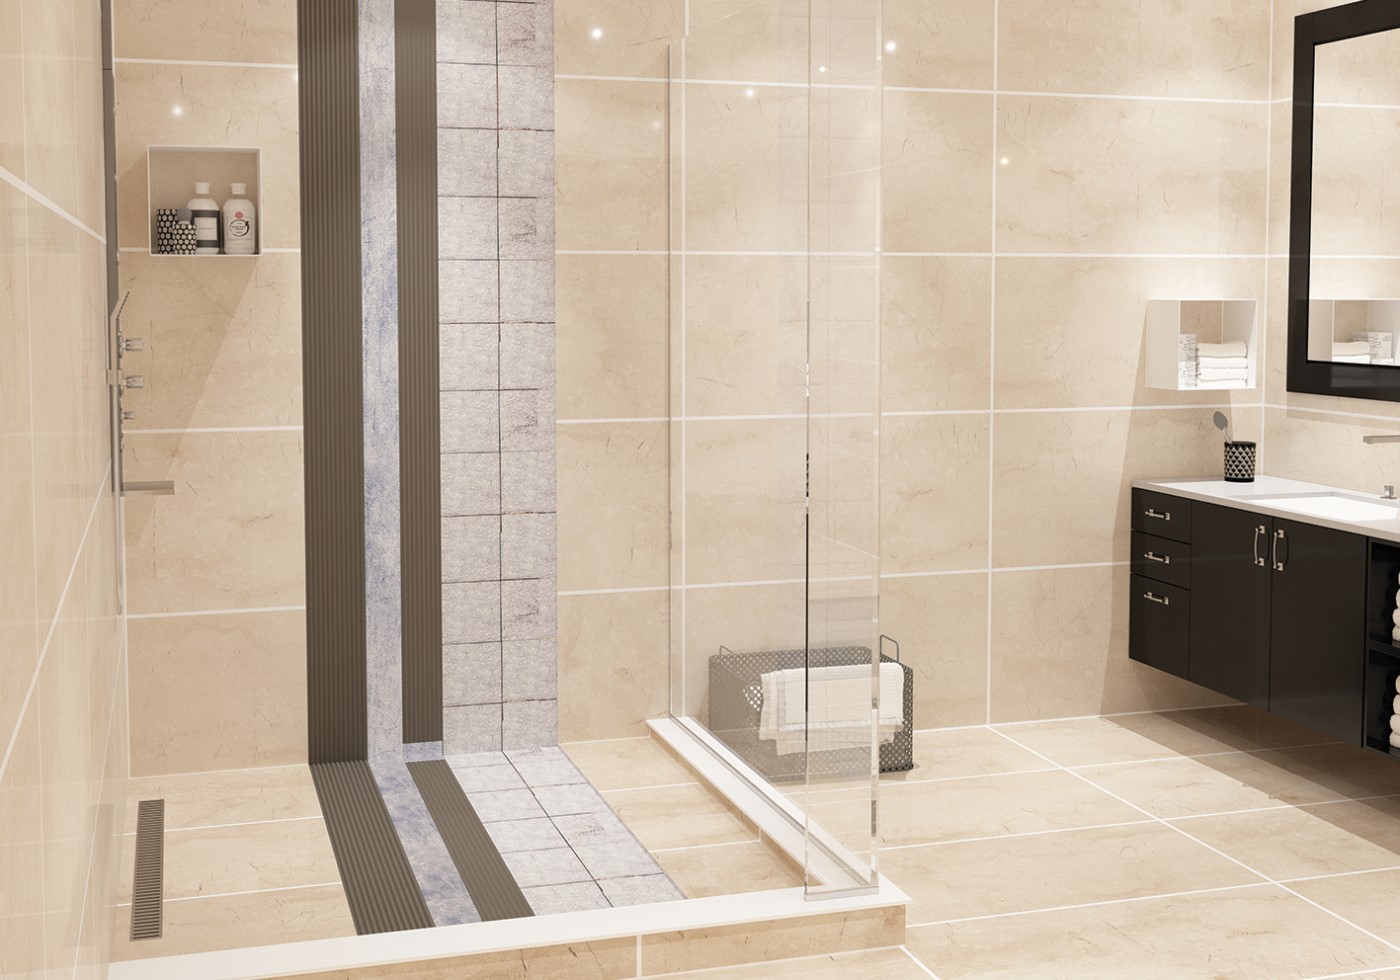 Rapid Solutions for Waterproofing & Ceramic Tile Application on Existing Tiles